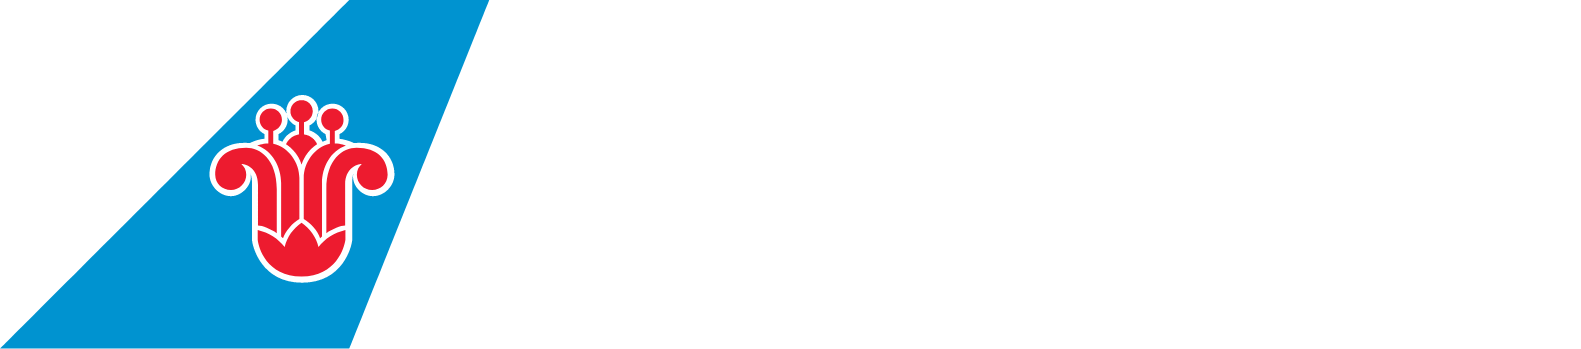 China Southern Airlines
 logo large for dark backgrounds (transparent PNG)